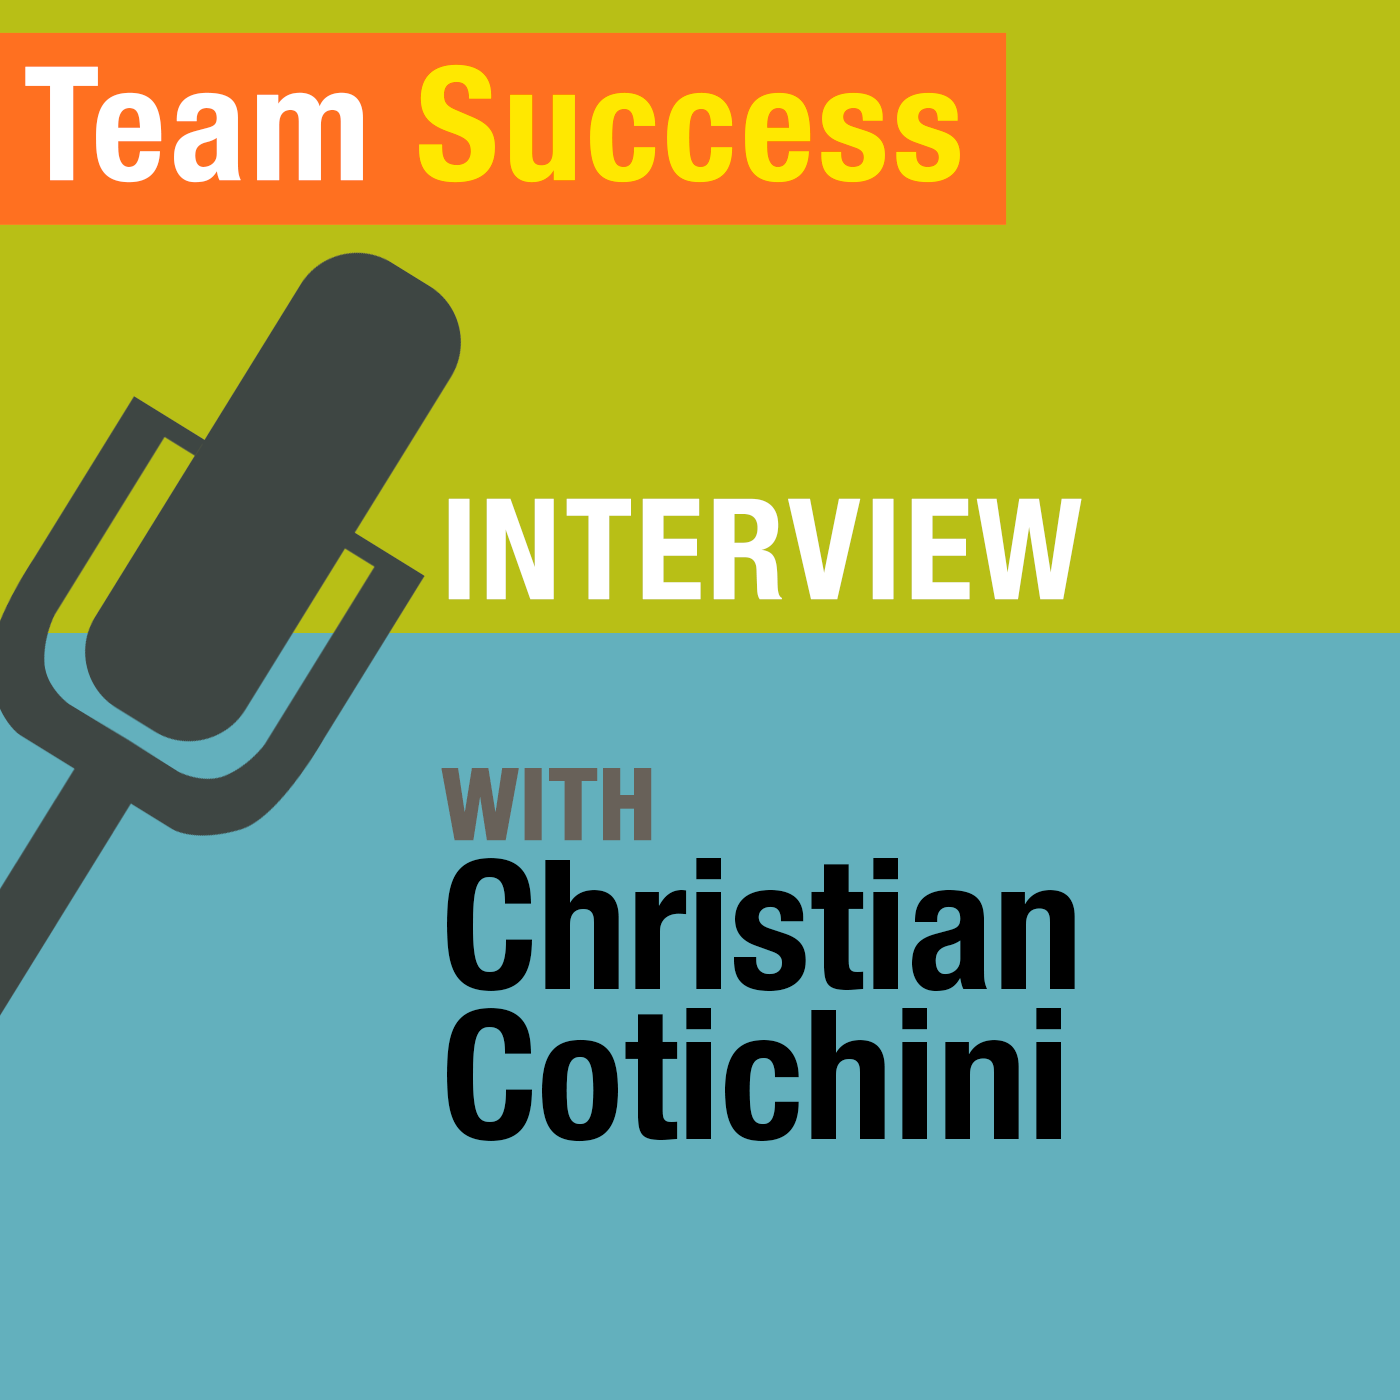 An Interview With Christian Cotichini